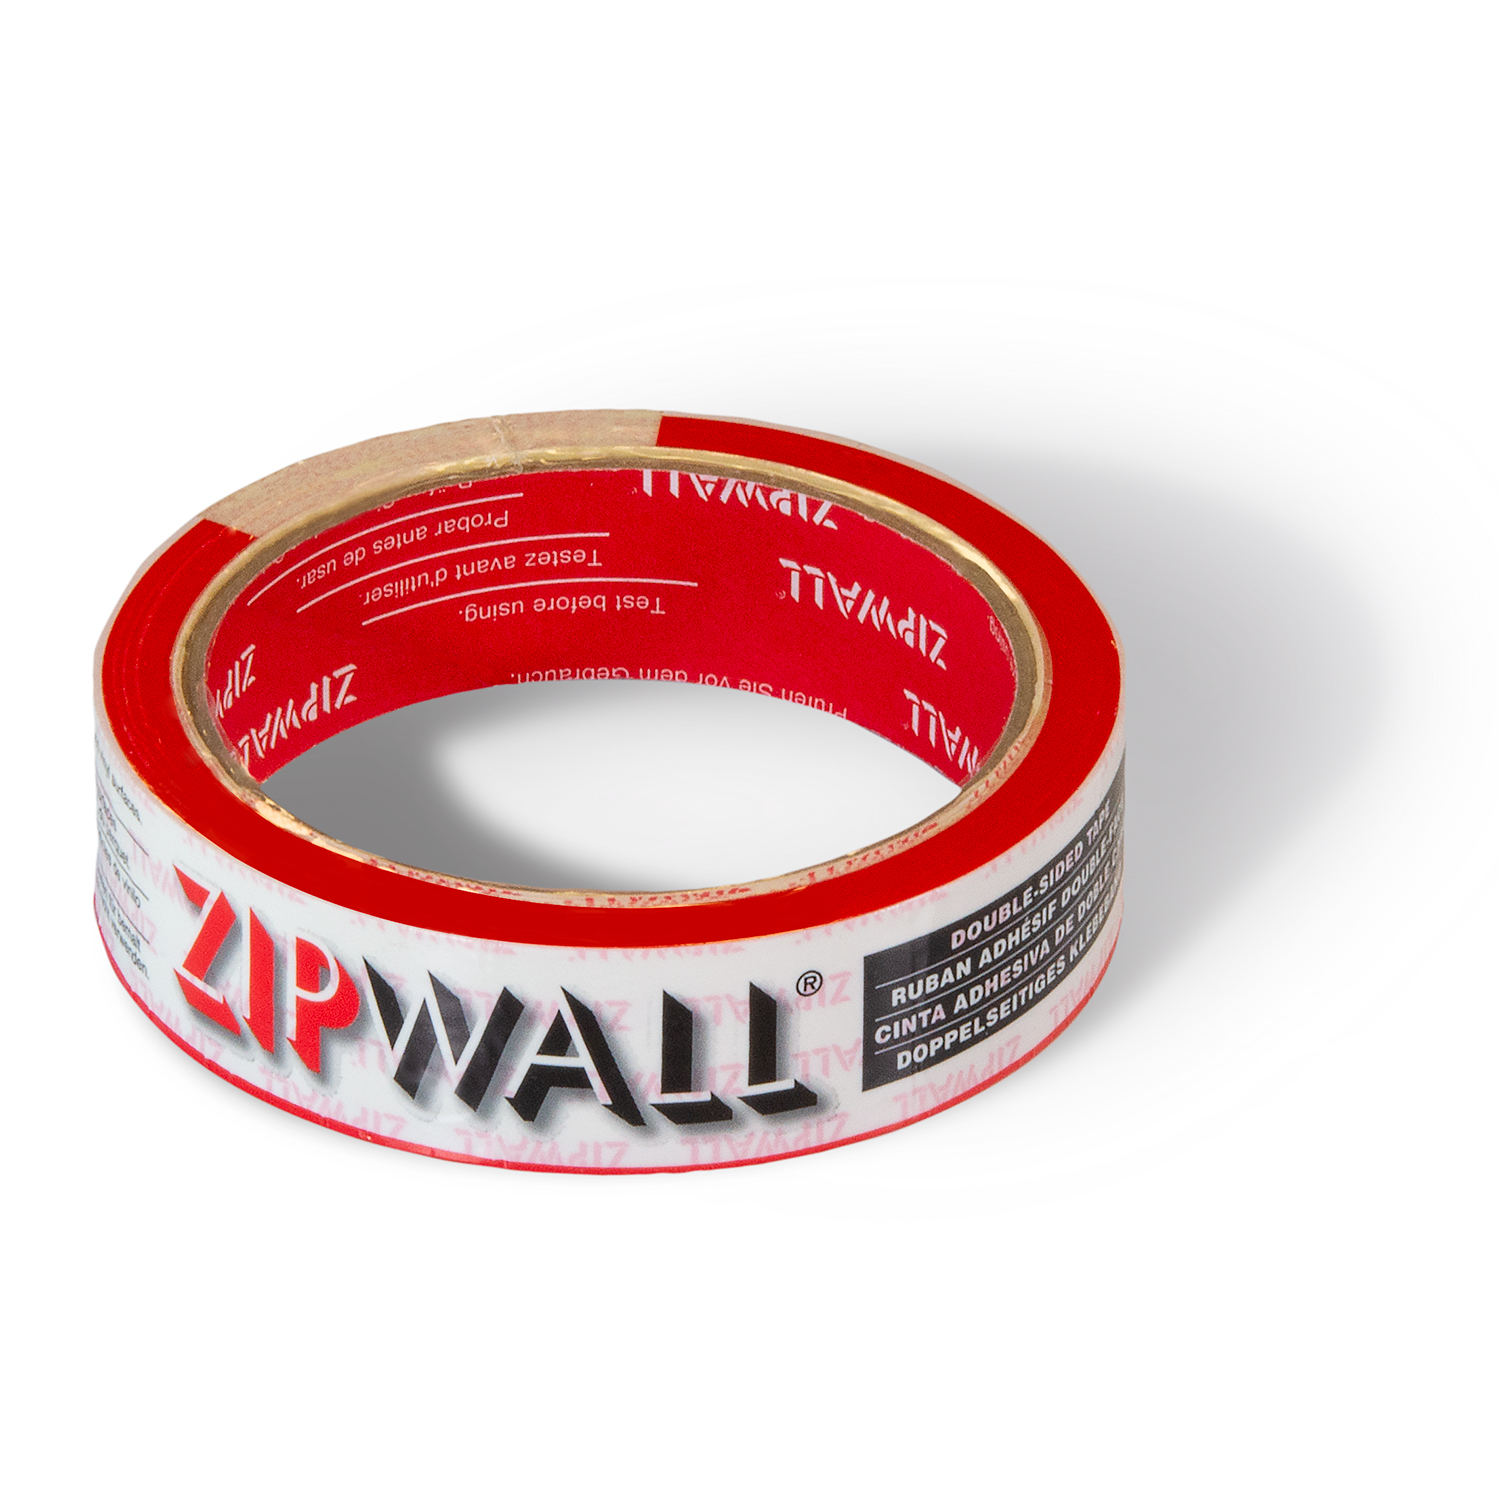 Zip-Up 2 Sided Containment Tape 2 X 60' Roll